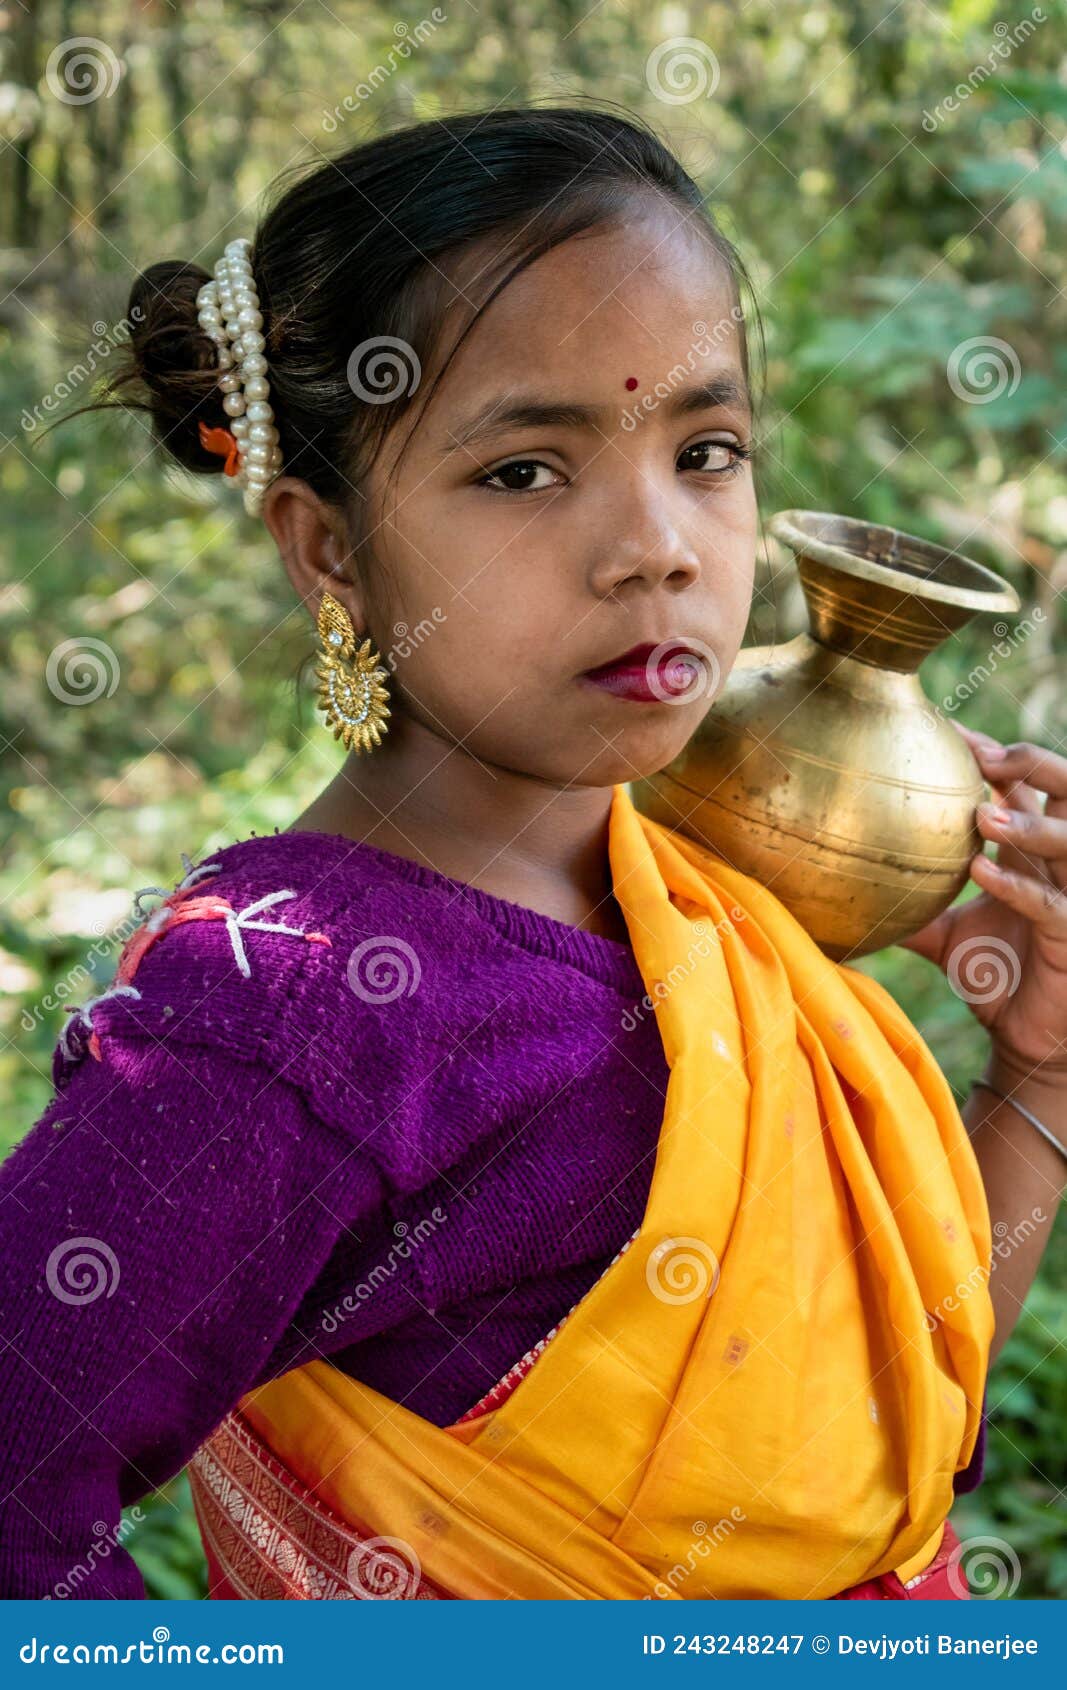 https://thumbs.dreamstime.com/z/tribal-teenage-girl-walking-woods-to-fetch-water-brass-pitcher-indian-path-forest-alone-wearing-traditional-243248247.jpg